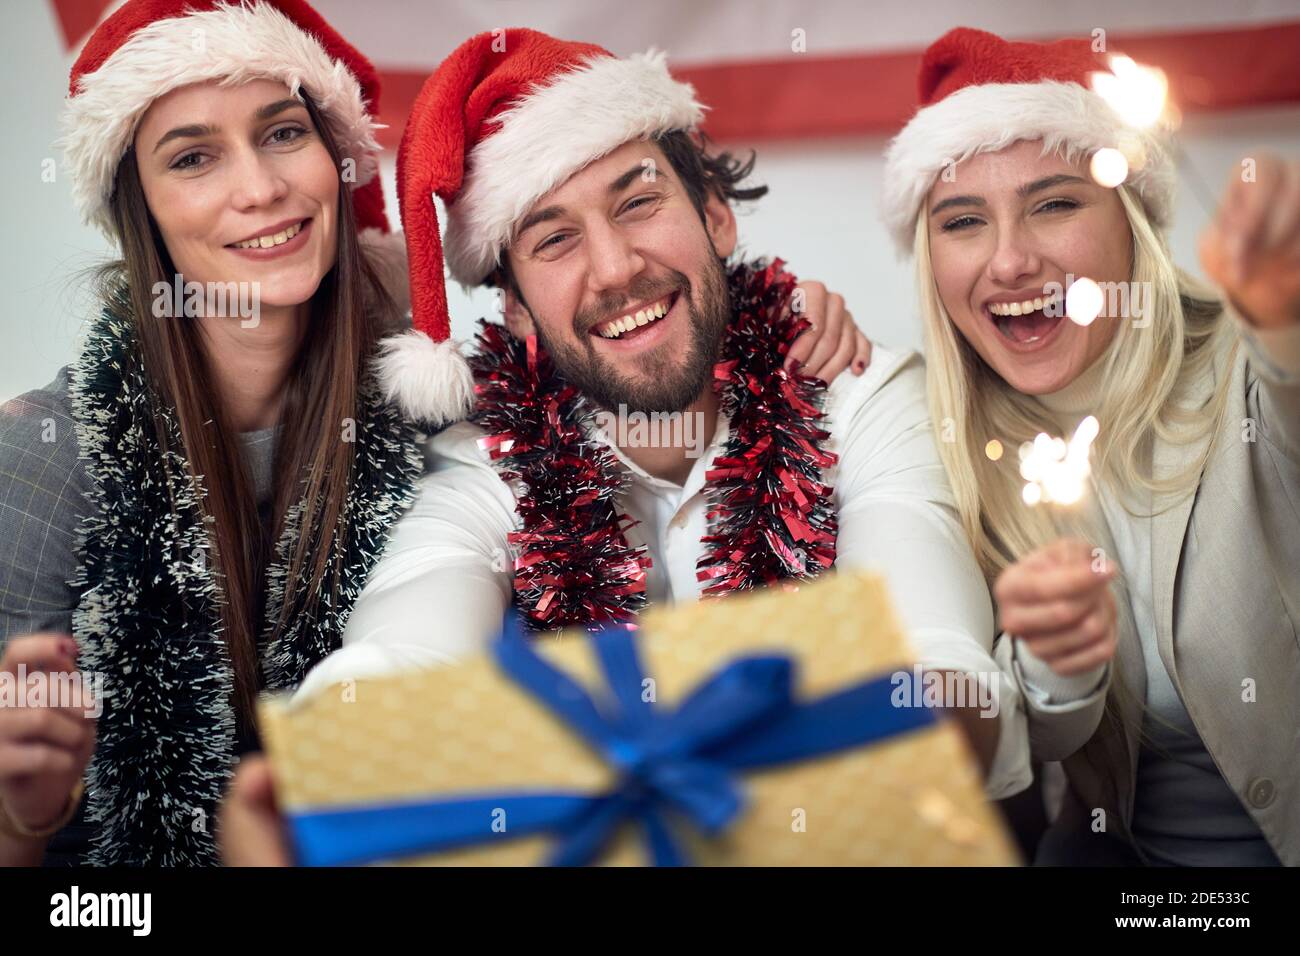 A group of cheerful friends posing for a photo at a Xmas home party in a holiday atmosphere. Christmas, friendship, together Stock Photo